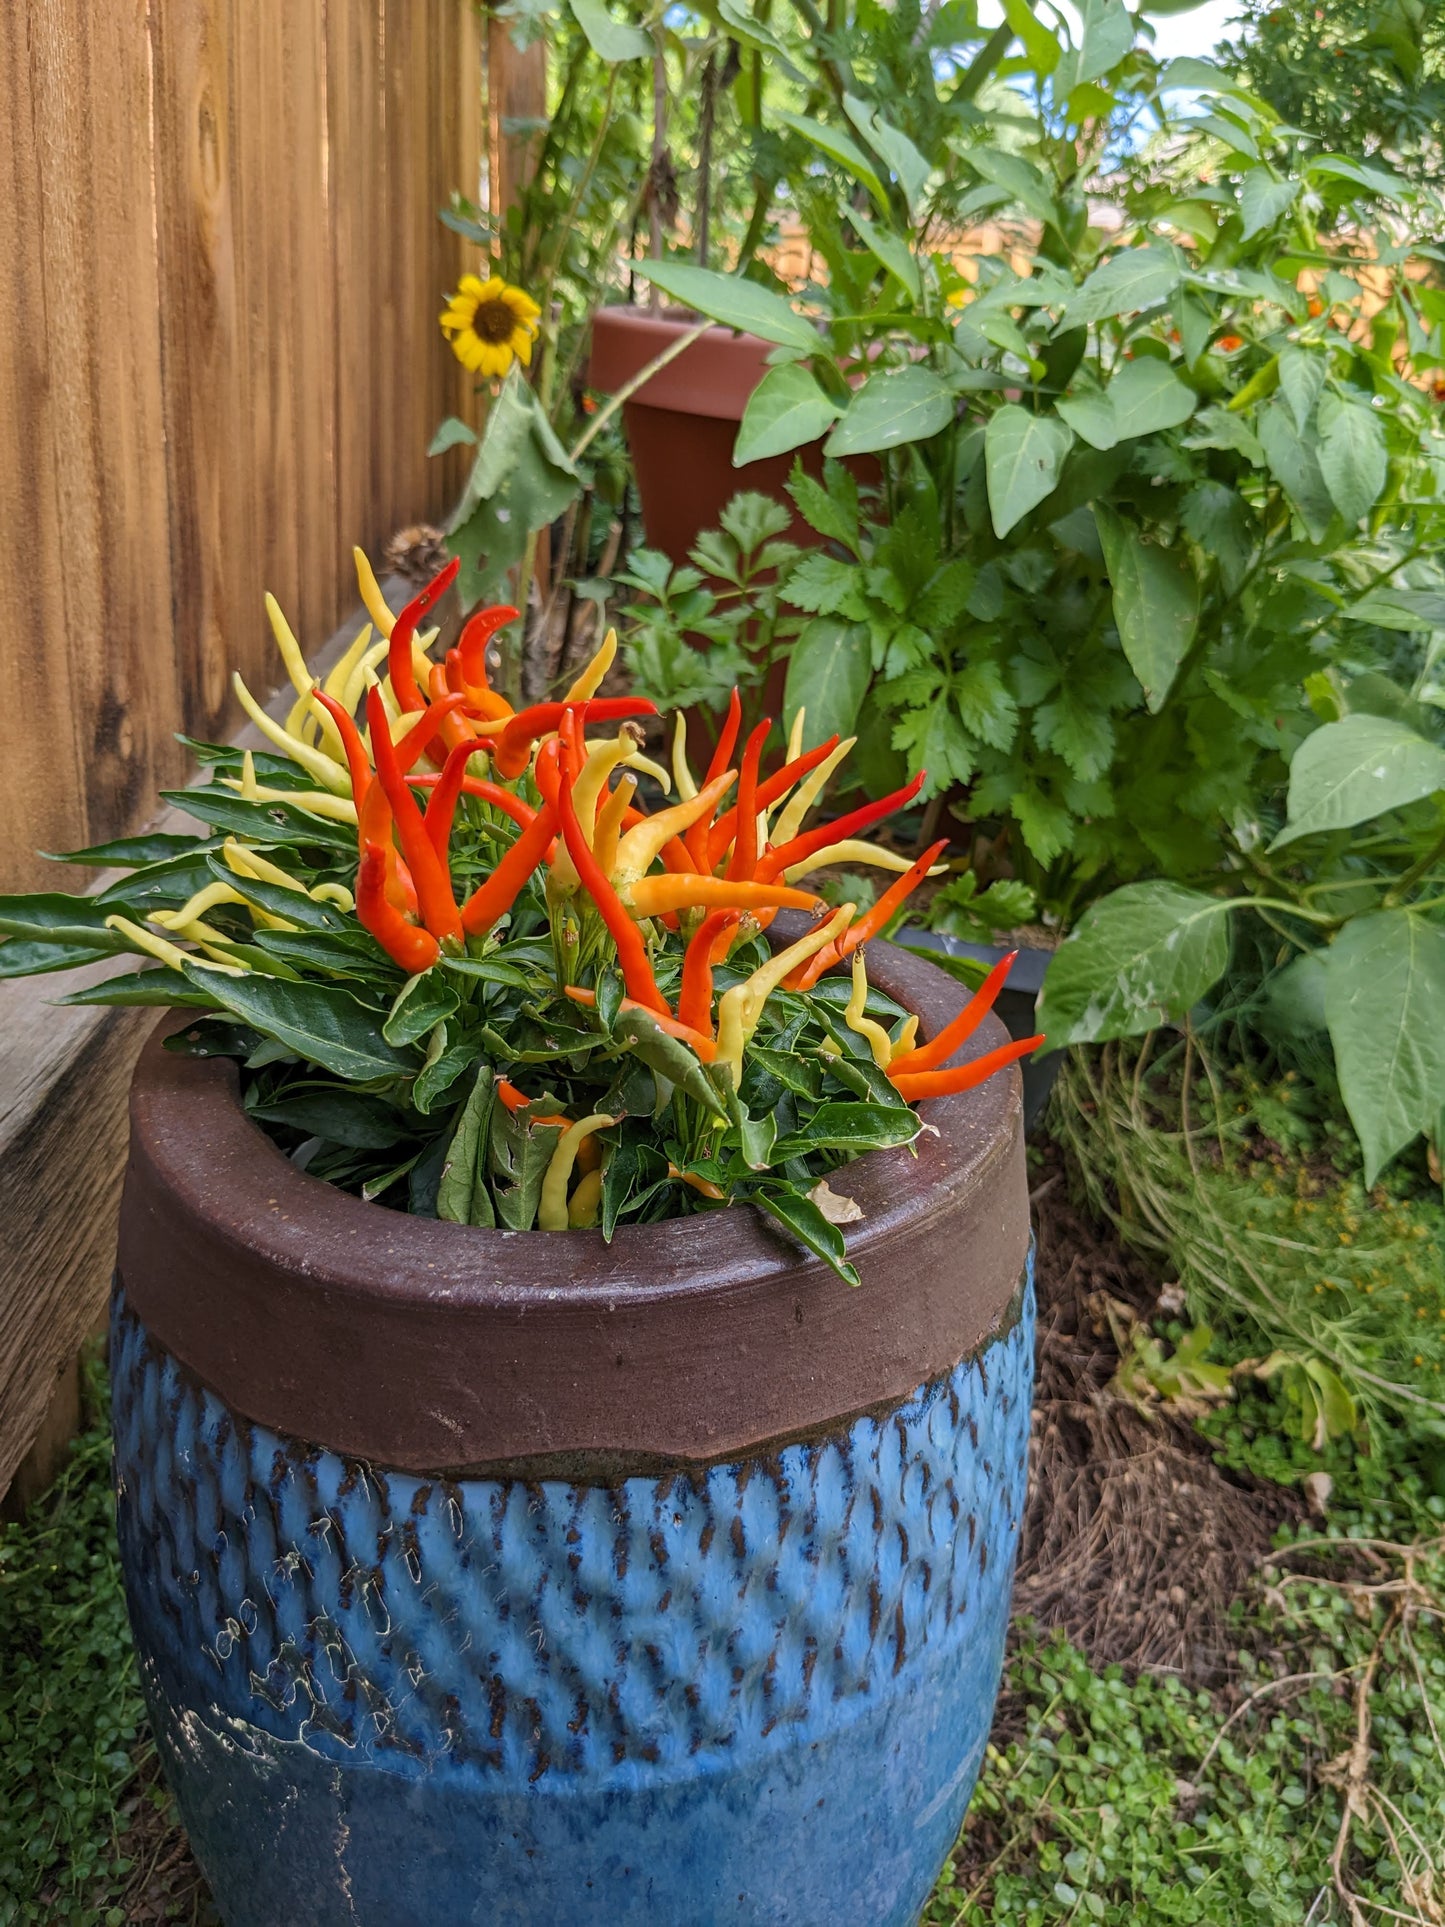 Fire and Ice peppers are perfect for pots!